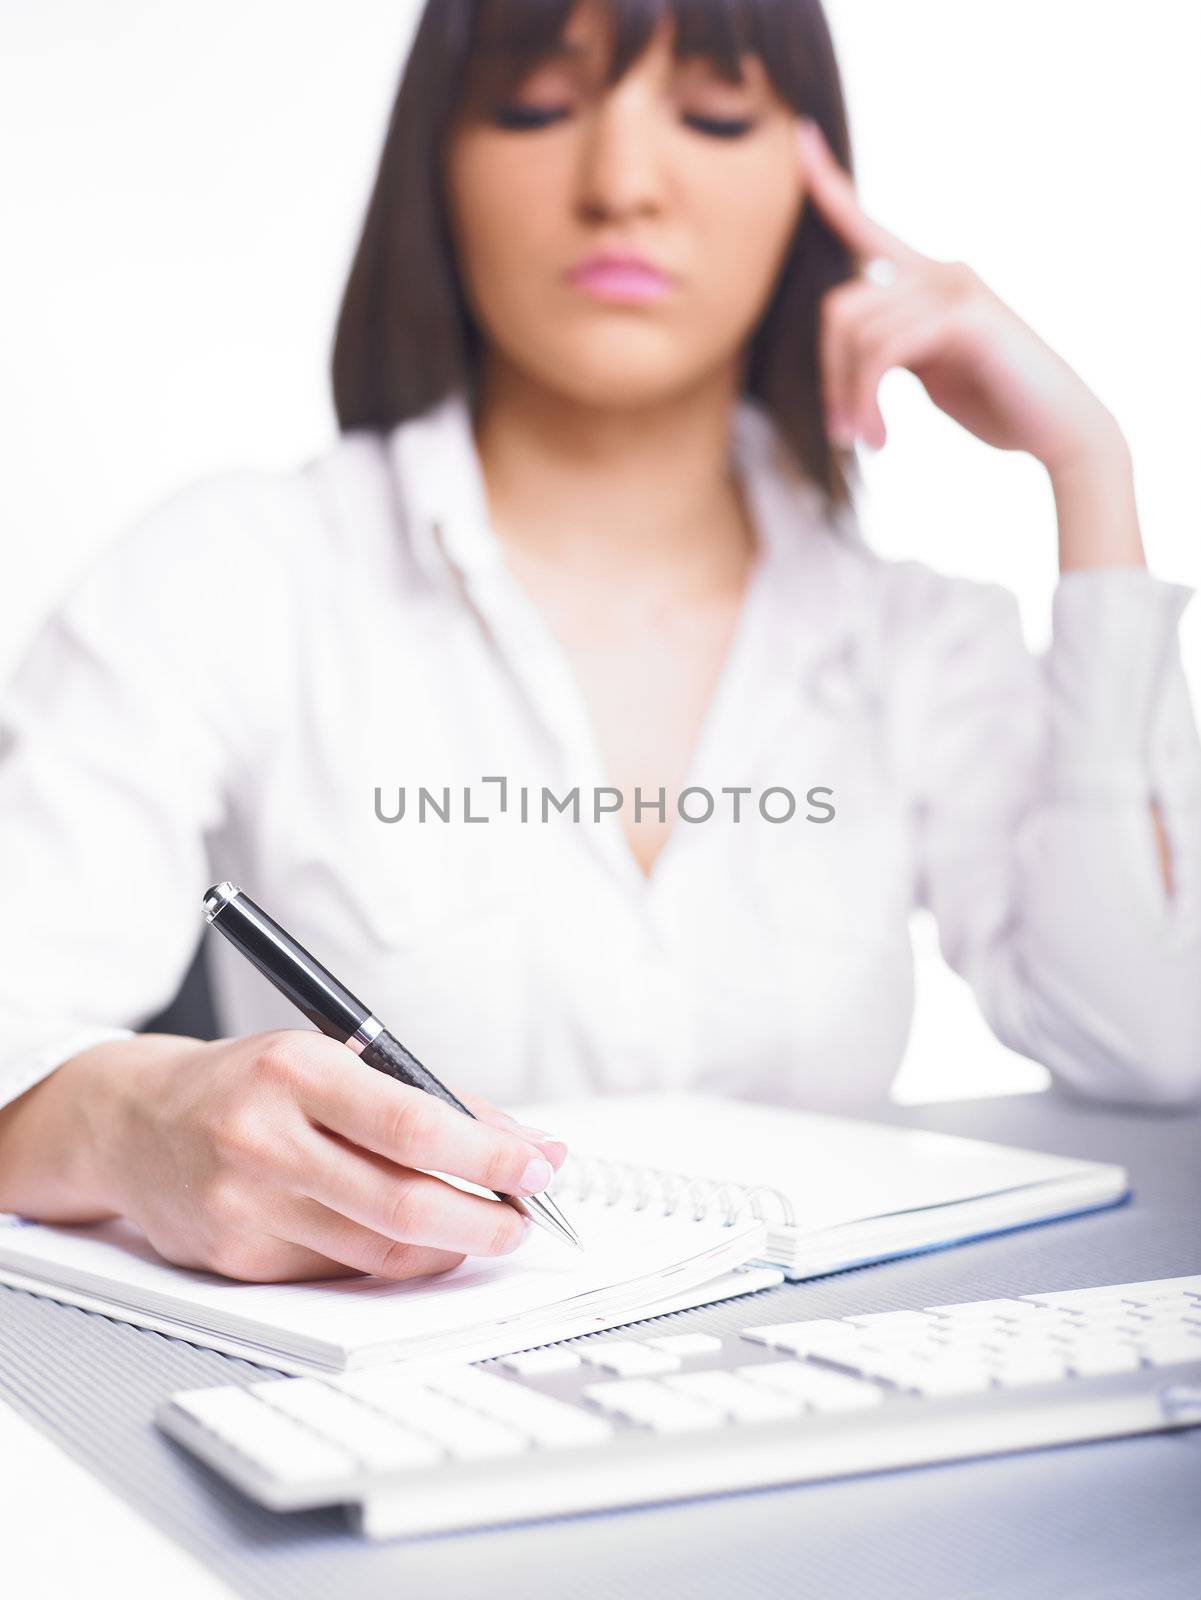 Happy Business Woman Writing in notepad